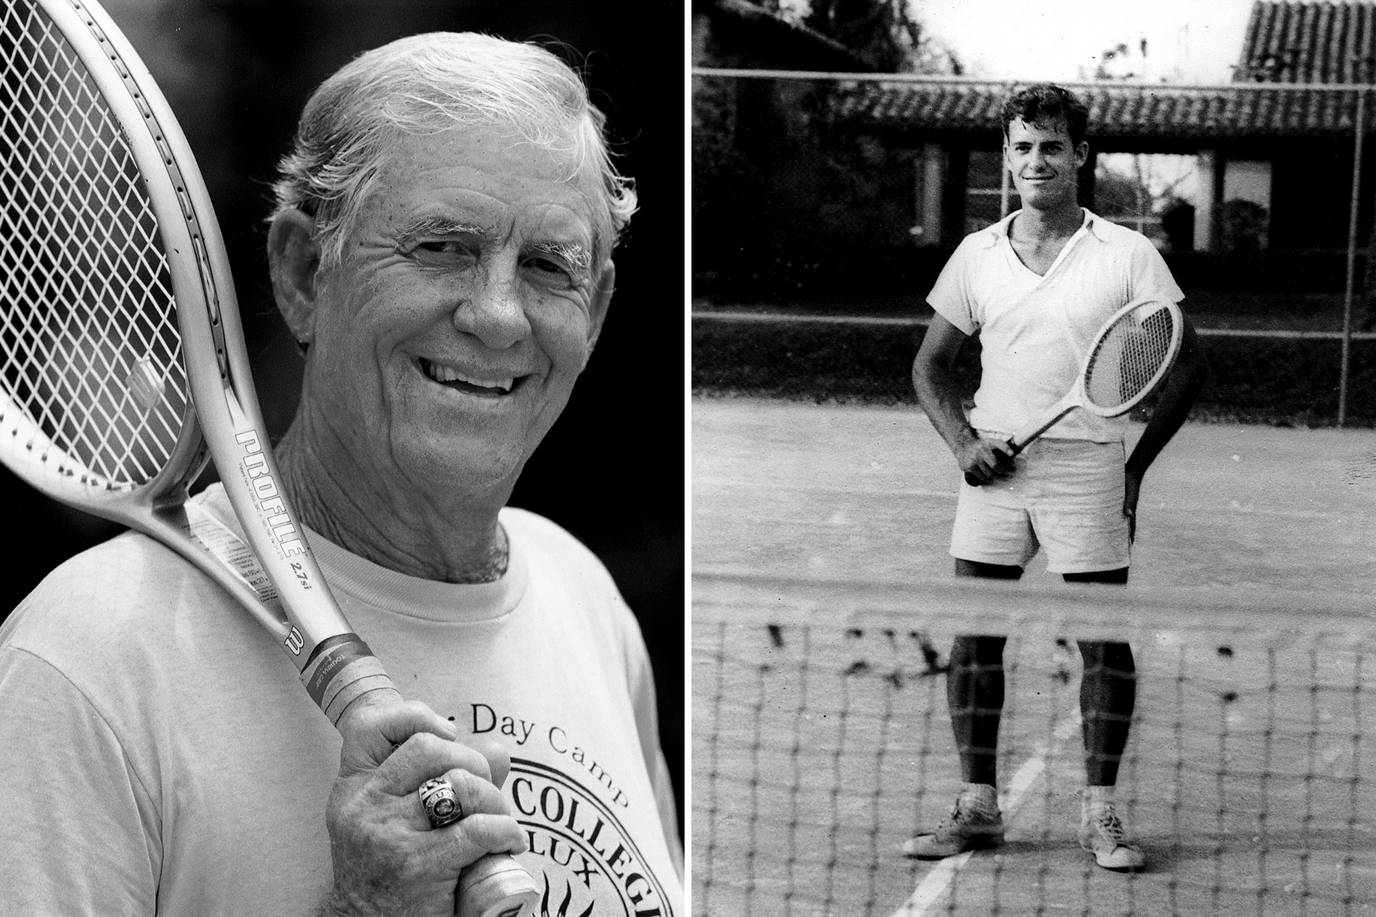 Norm Copeland pictured on the tennis court as a Rollins student and then as Rollins’ tennis coach many years later.